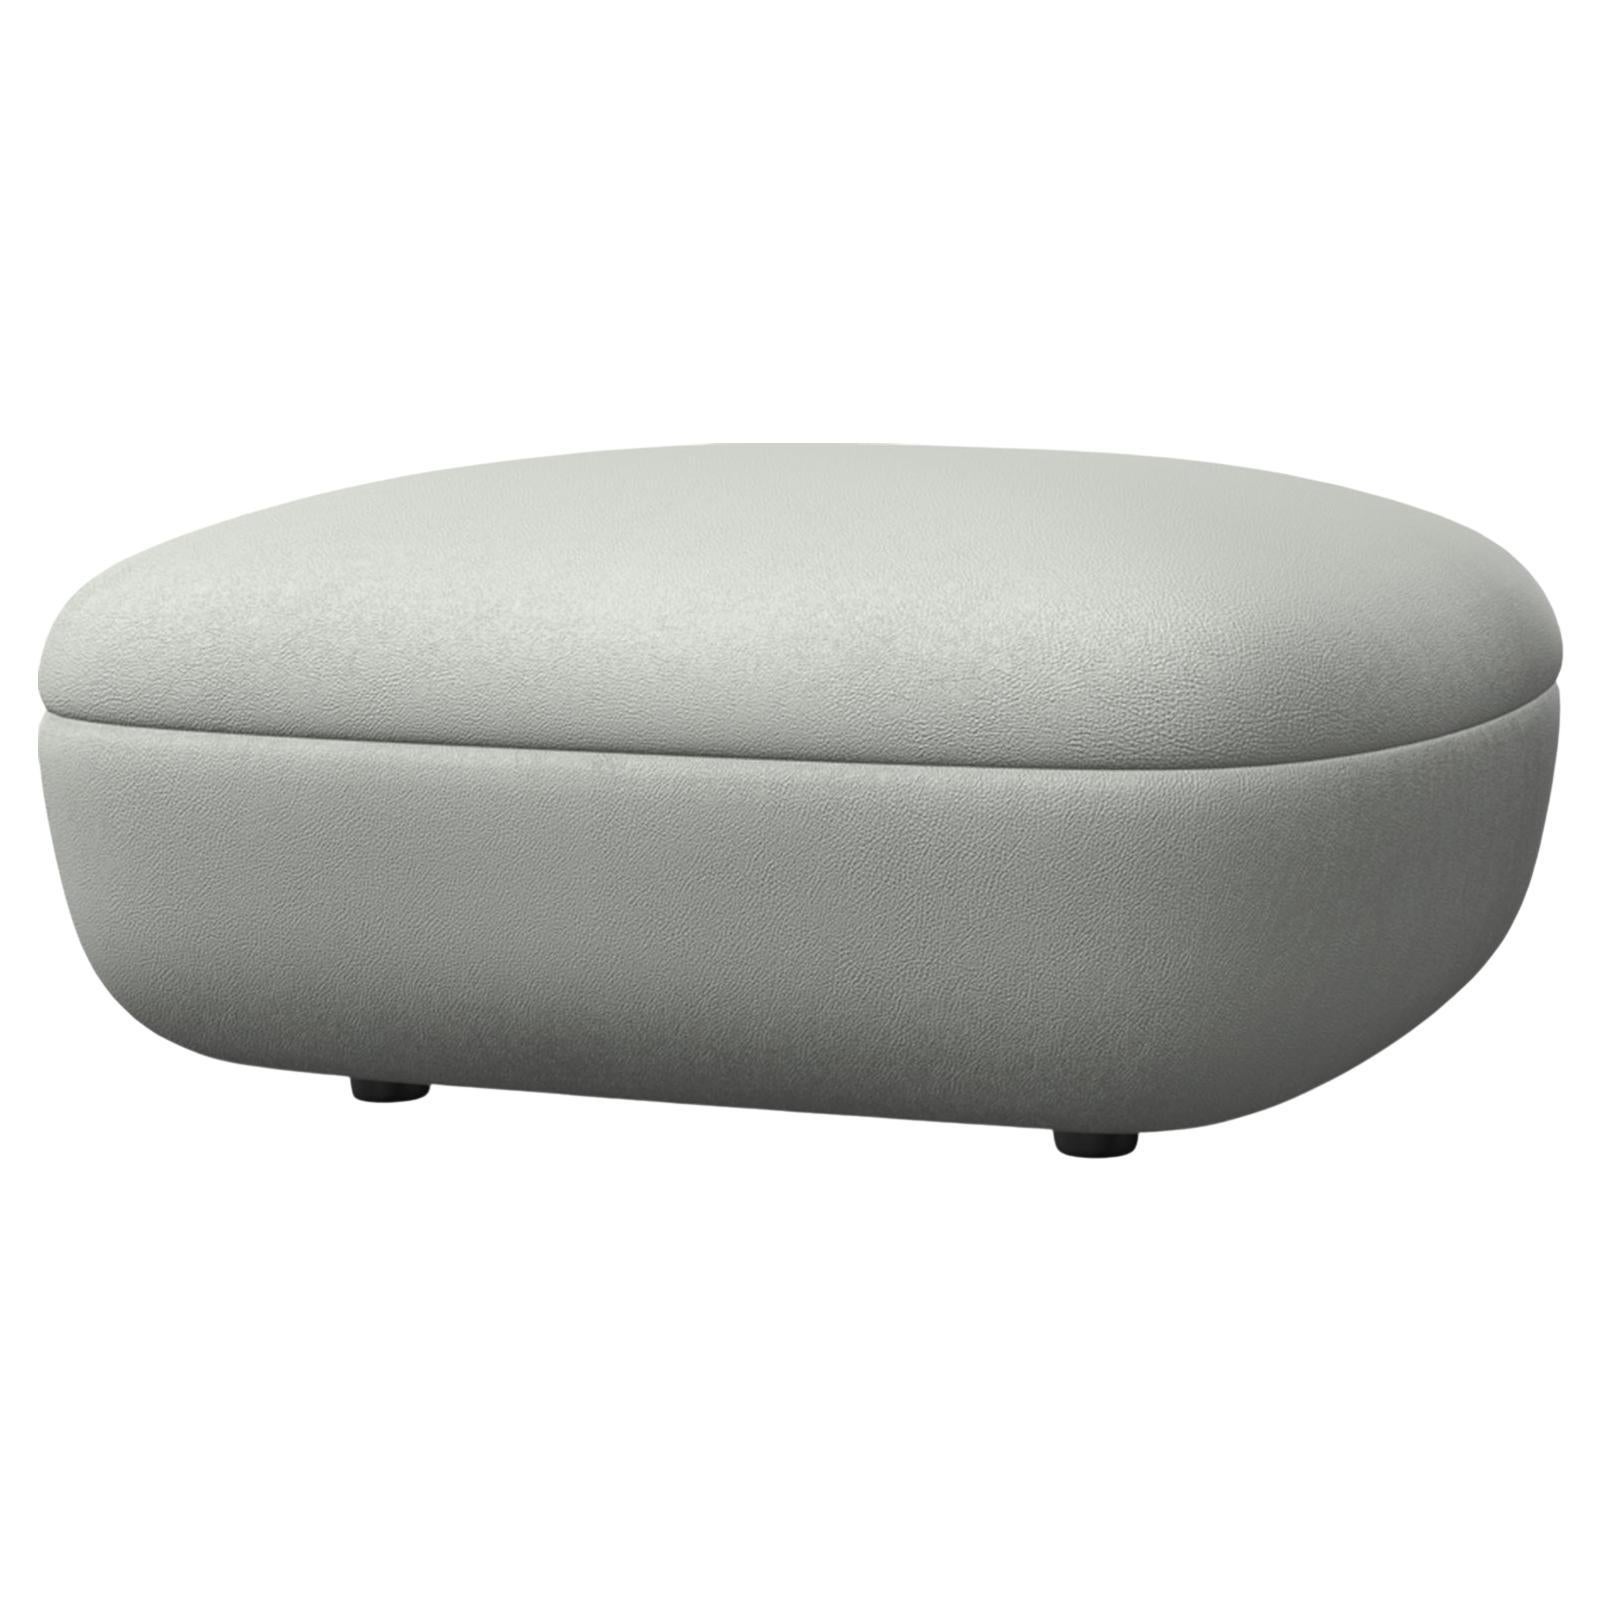 Moooi Bart Footstool in Ultra White 41594 Upholstery